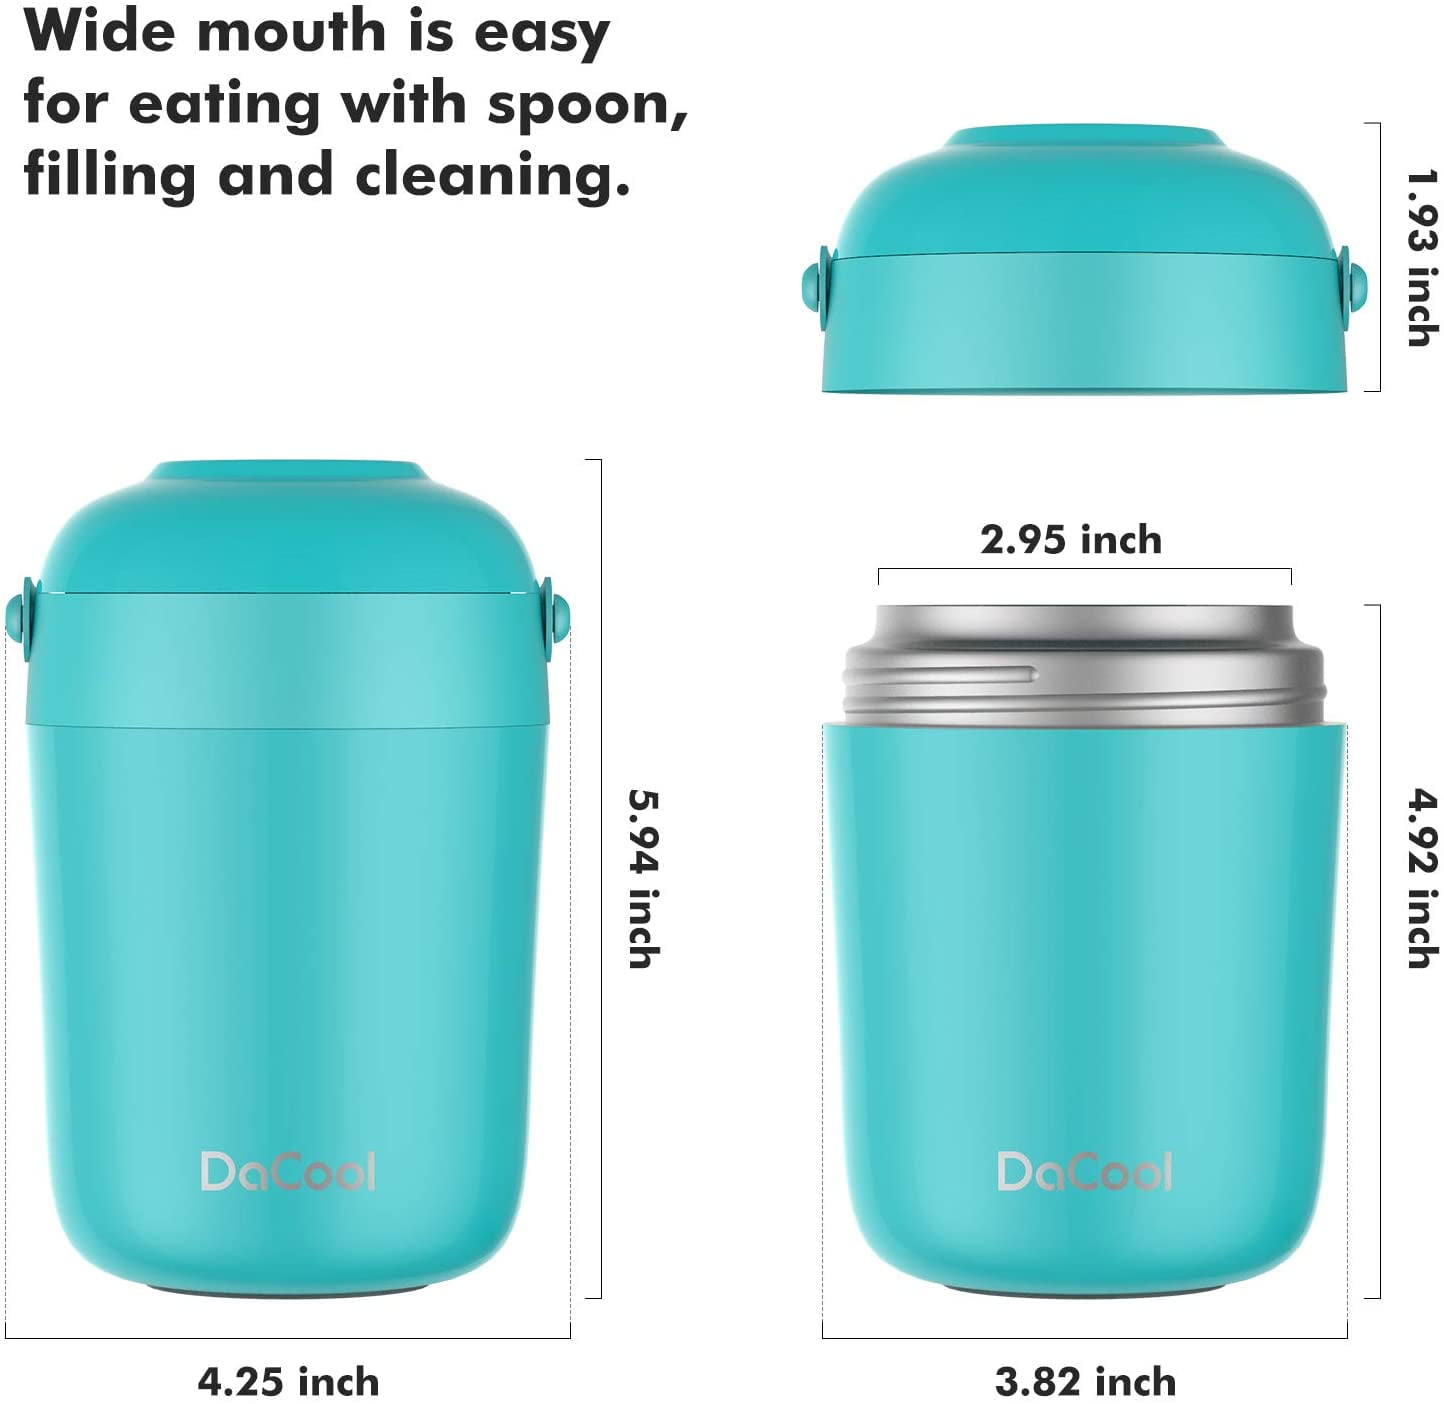 DaCool Kids Thermos for Hot Food Vacuum Stainless Steel Insulated Food Jar  13.5 OZ Kids Lunch Food Thermos Insulated Lunch Container Bento for School